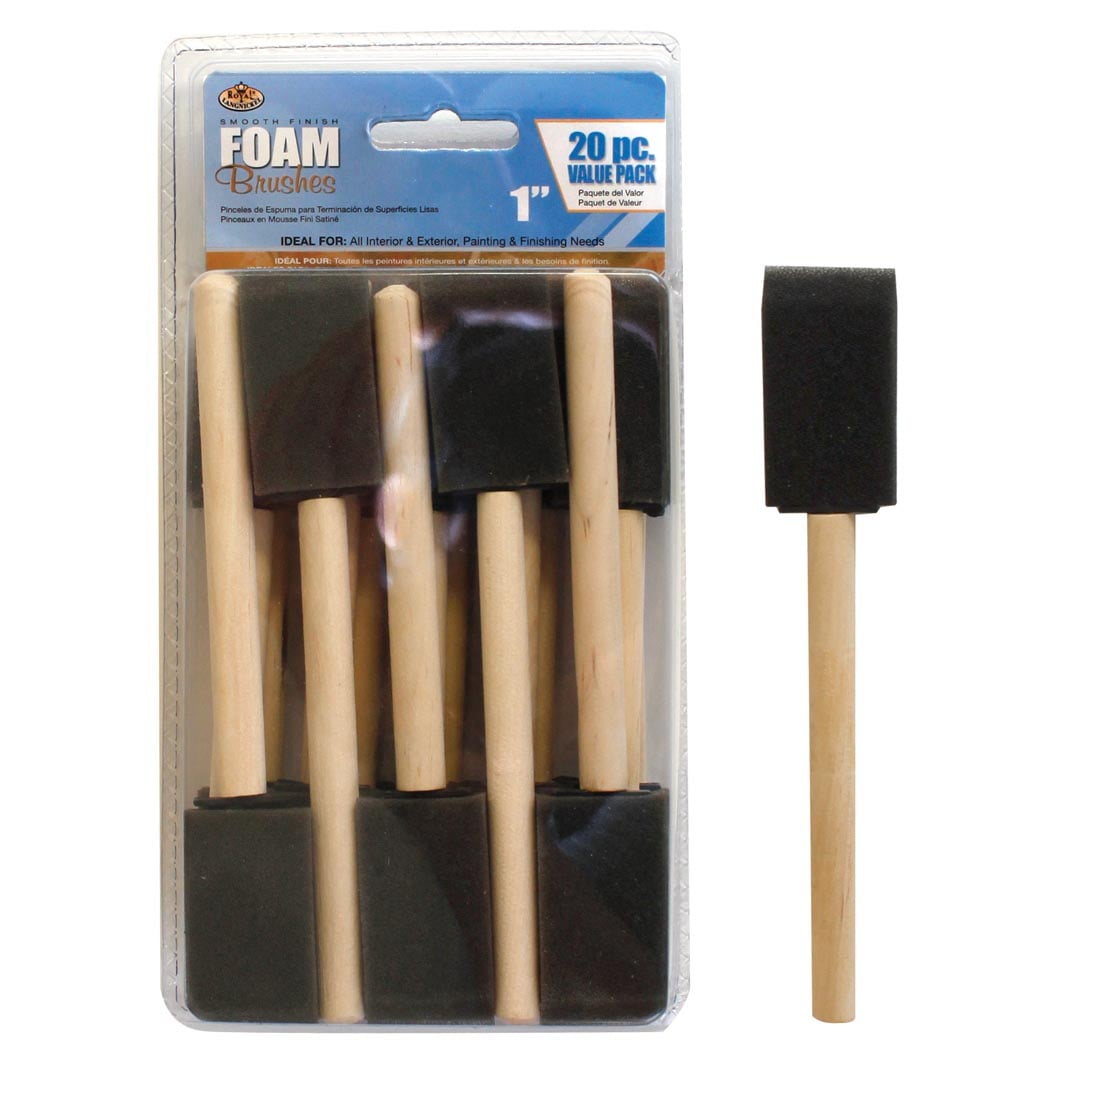 1 Foam Brushes with Wooden Handle - 20 Pack Royal Brush